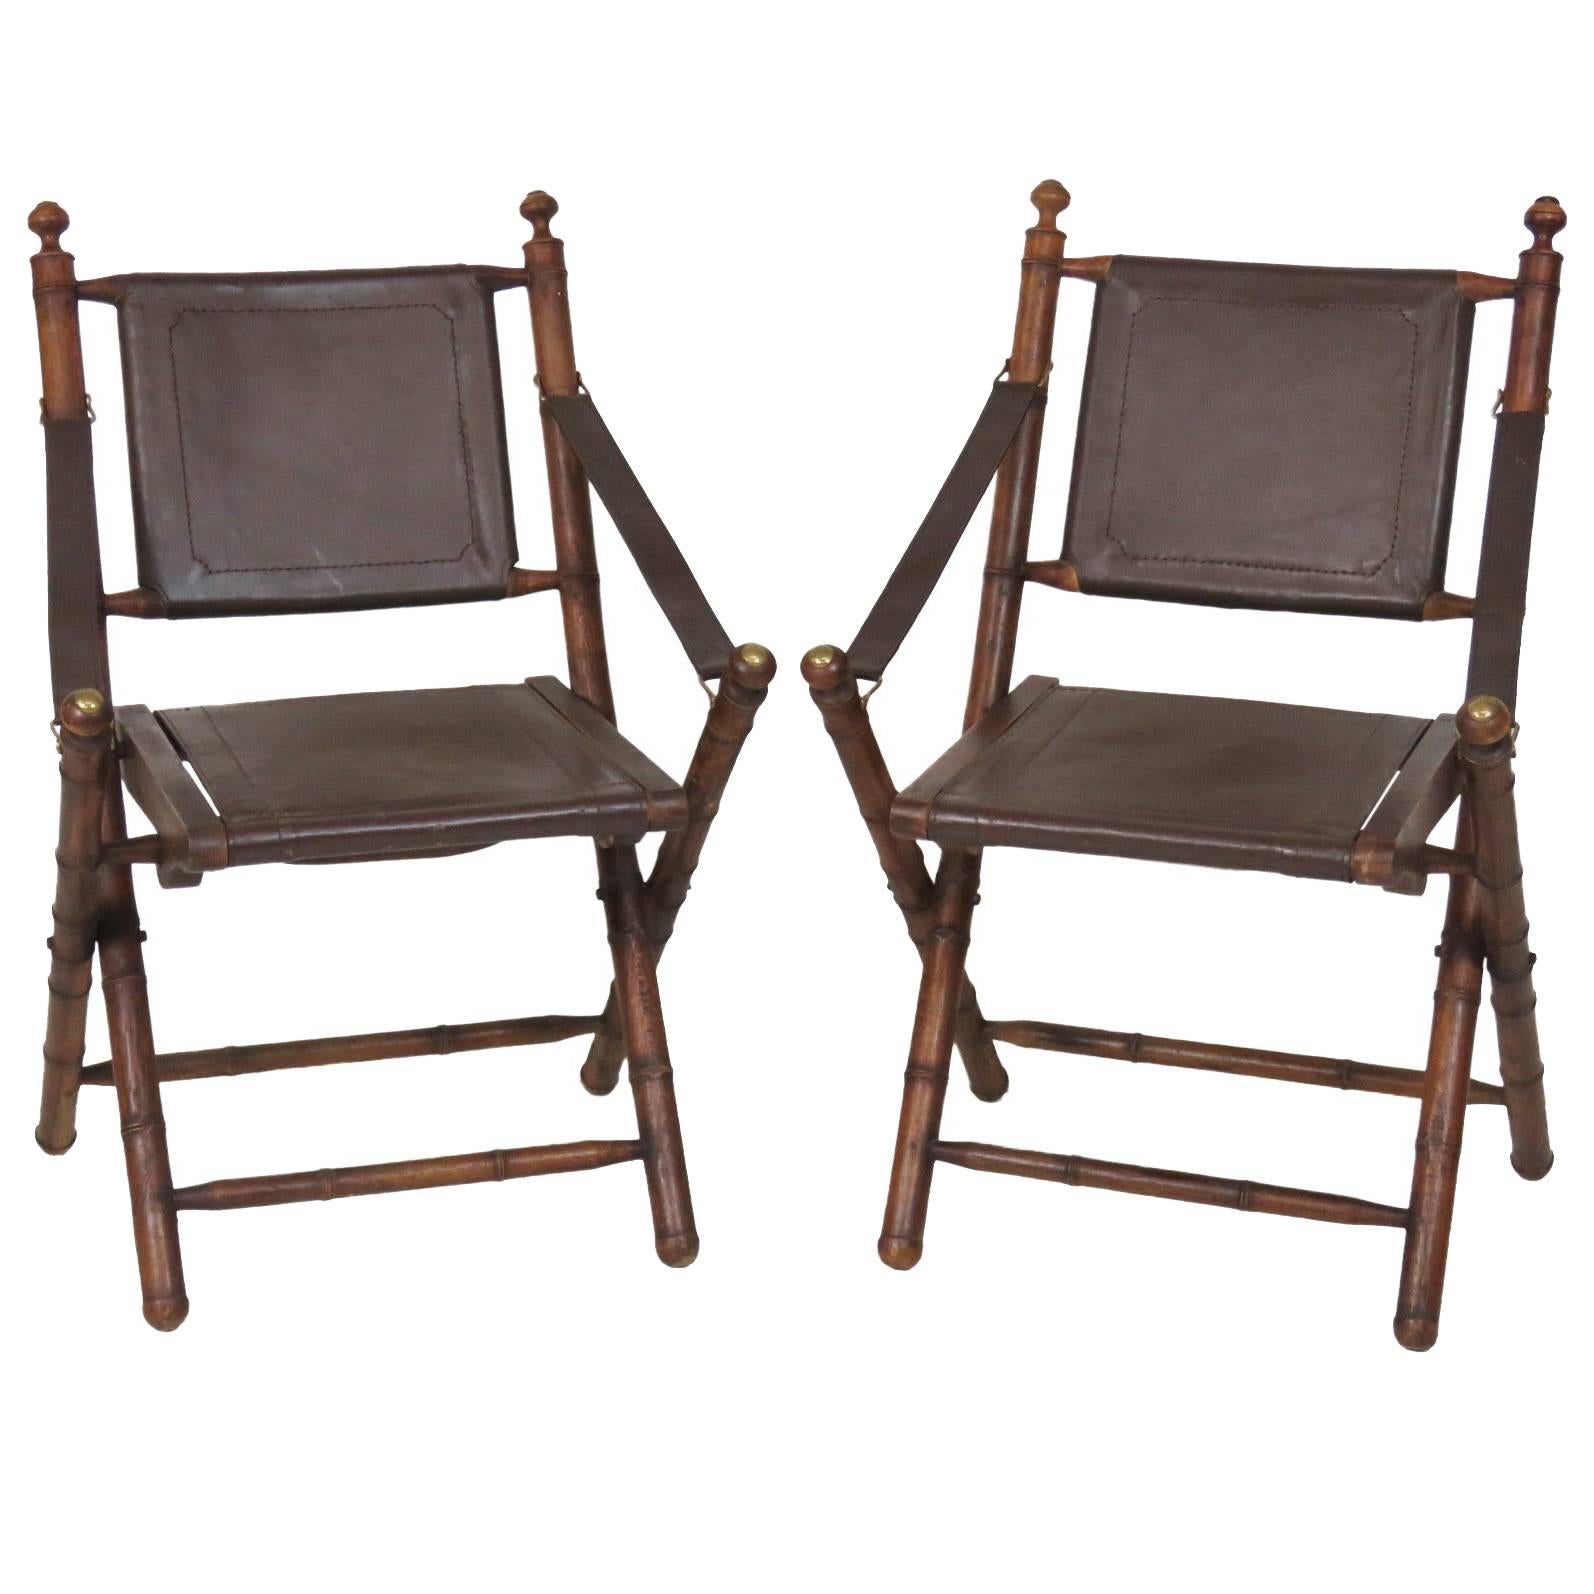 Pair of Faux Bamboo and Leather Folding Lounge Chairs